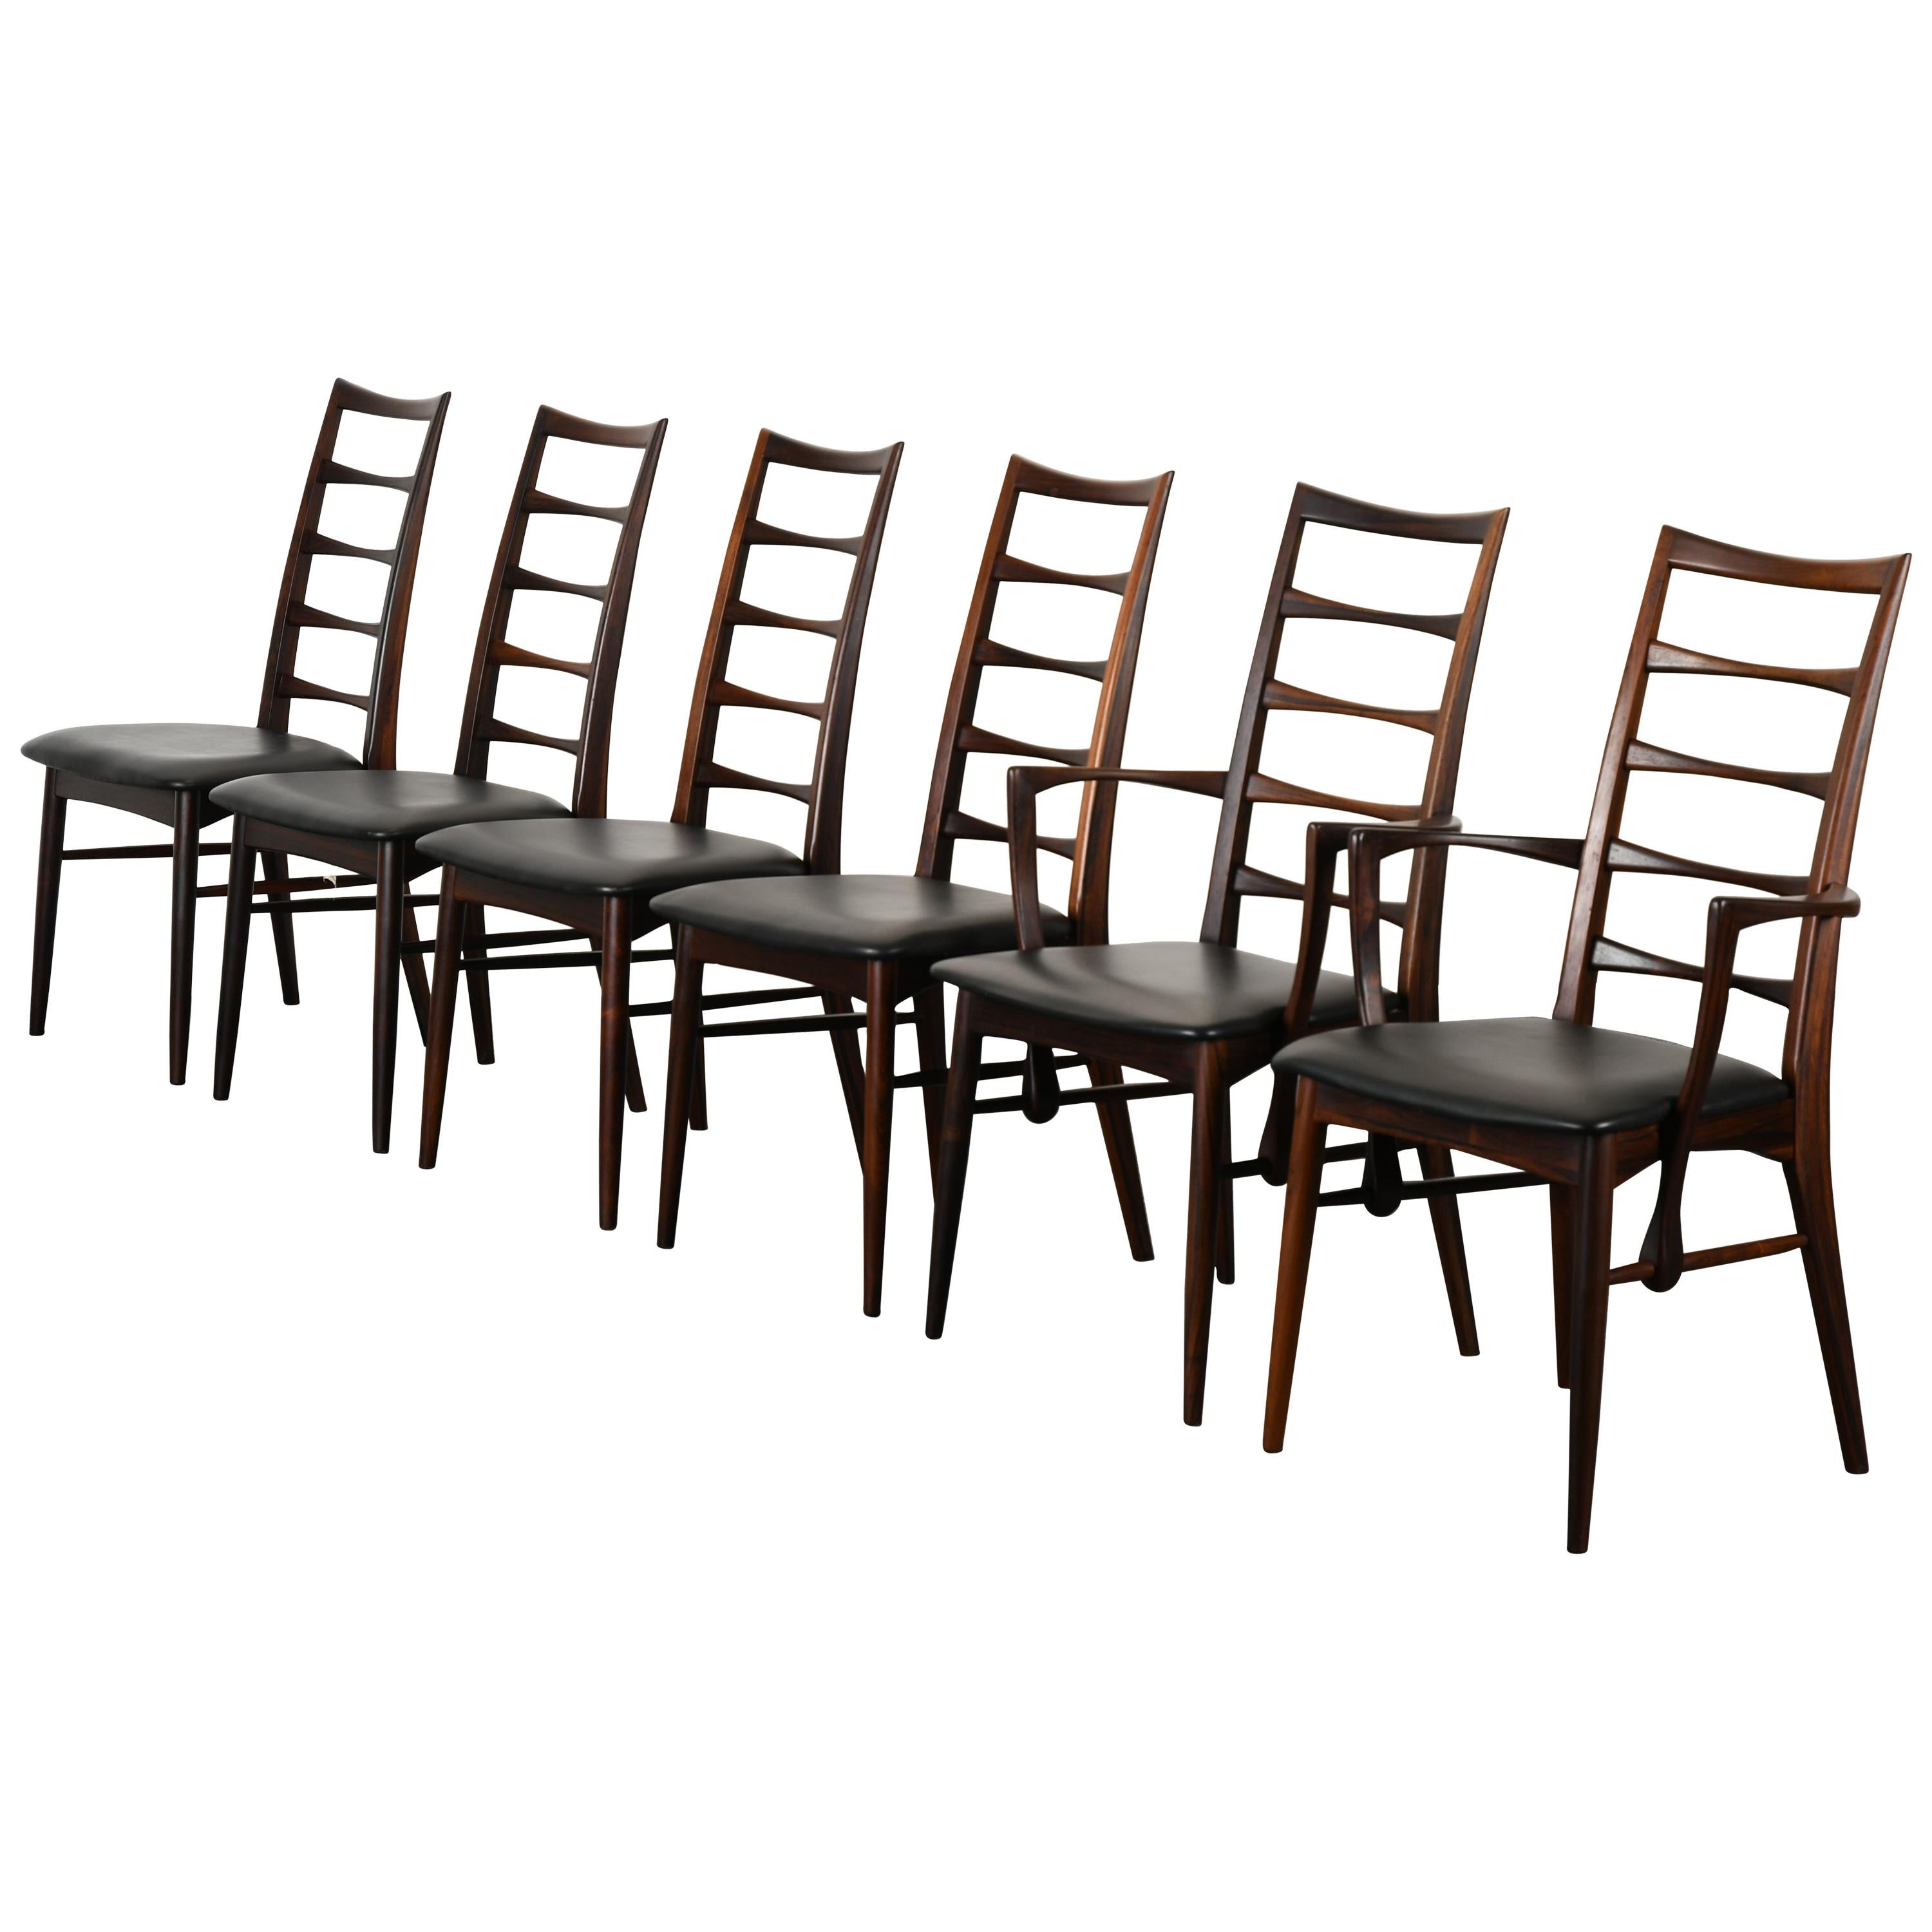 Set of Six Rosewood "Lis" Dining Chairs by Niels Koefoed, 1960s